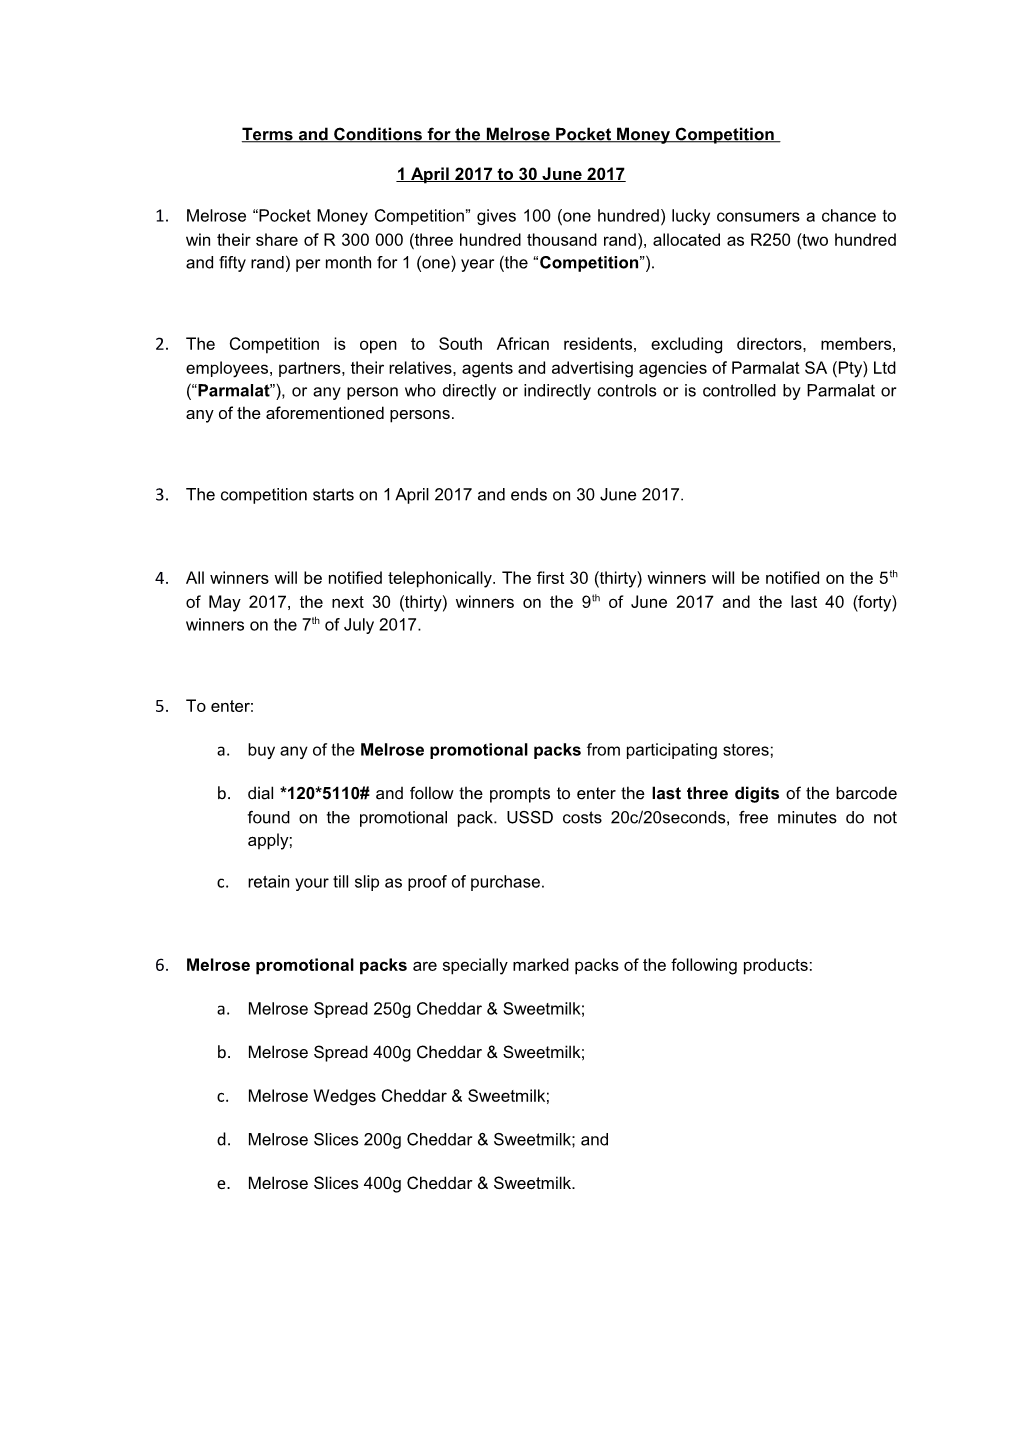 Terms and Conditions for the Melrose Pocket Money Competition